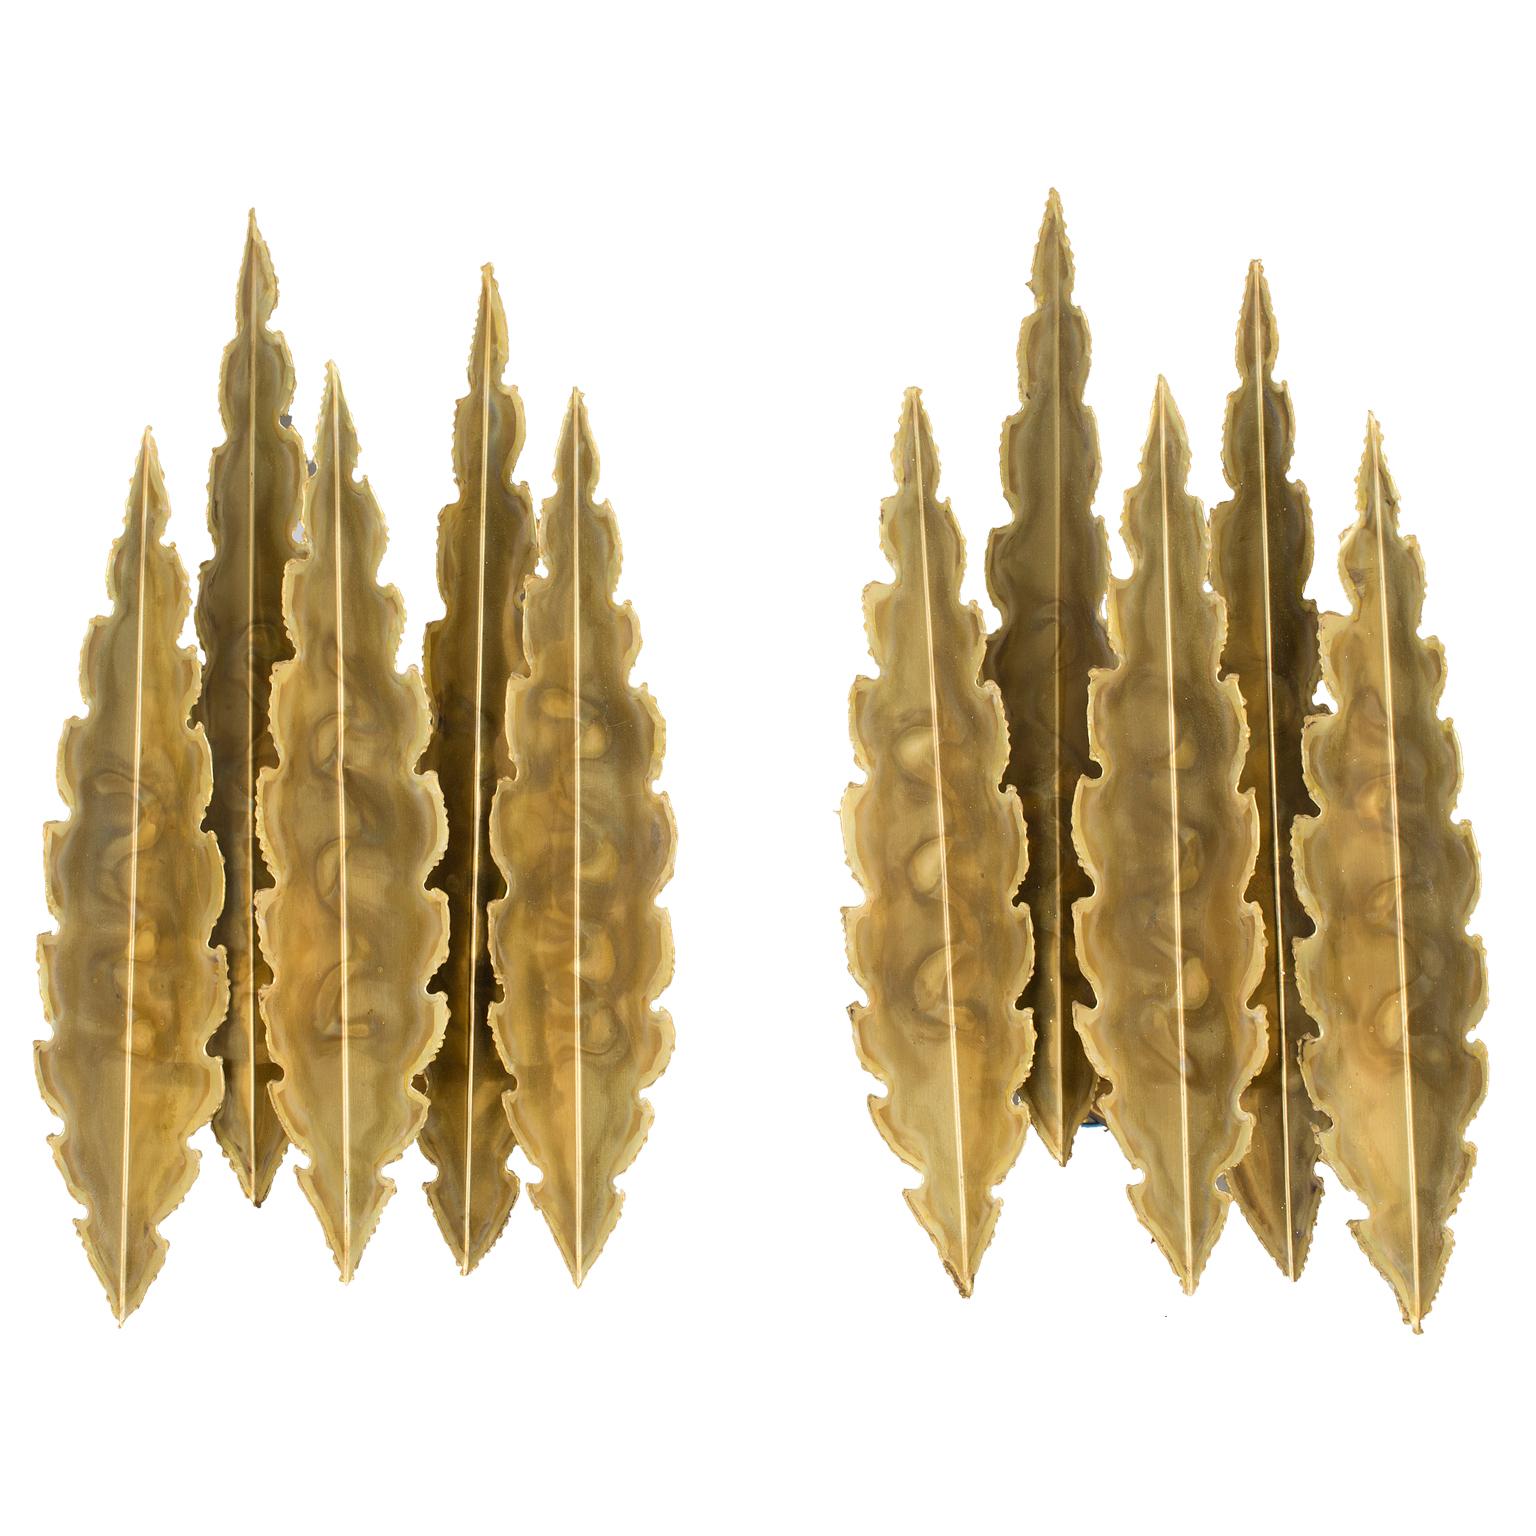 Eternal flames. Light 5195, large brass wall sconce from the 1960s by Svend Aage Holm Sorensen, rare large Brutalist style wall light in excellent vintage condition.
A pair of beautiful large wall lights comprised of five serrated and flame-treated